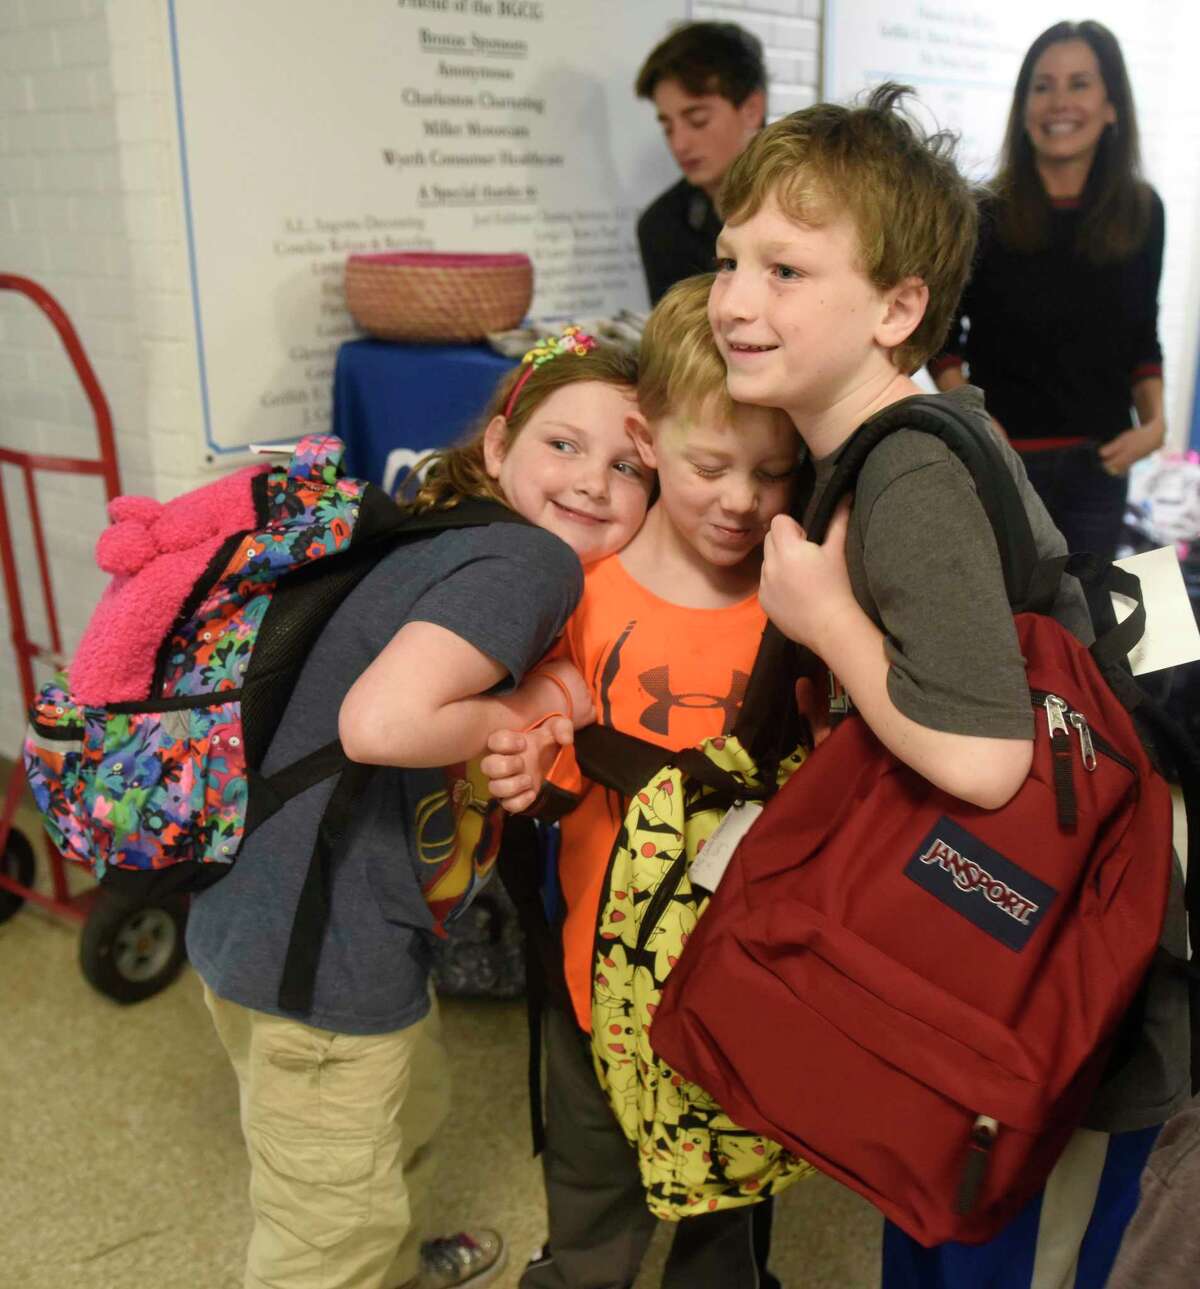 Riverside siblings Rachael Zazula, Joshua Zazula, and Elijah Zazula show their new backpacks at the Filling in the Blanks backpack distribution event at the Boys & Girls Club of Greenwich in Greenwich, Conn. Tuesday, Dec. 10, 2019. The Norwalk-based nonprofit Filling in the Blanks distributed backpacks containing winter hats, gloves, socks, pancake mix, toys, books, and dental items to 100 low-income club members.